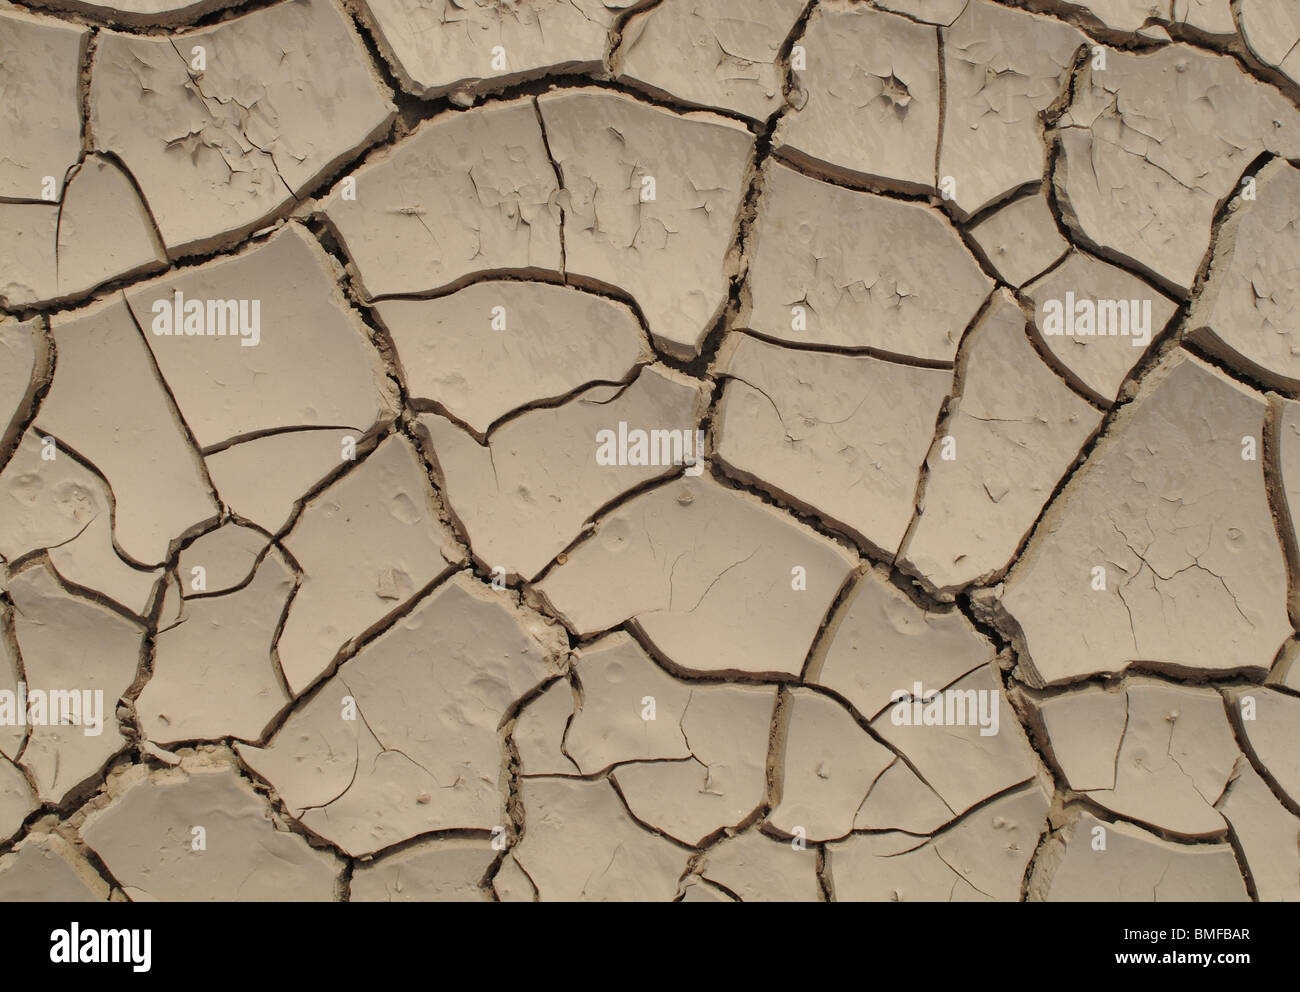 parched earth, the effect of global warming or climate change Stock Photo